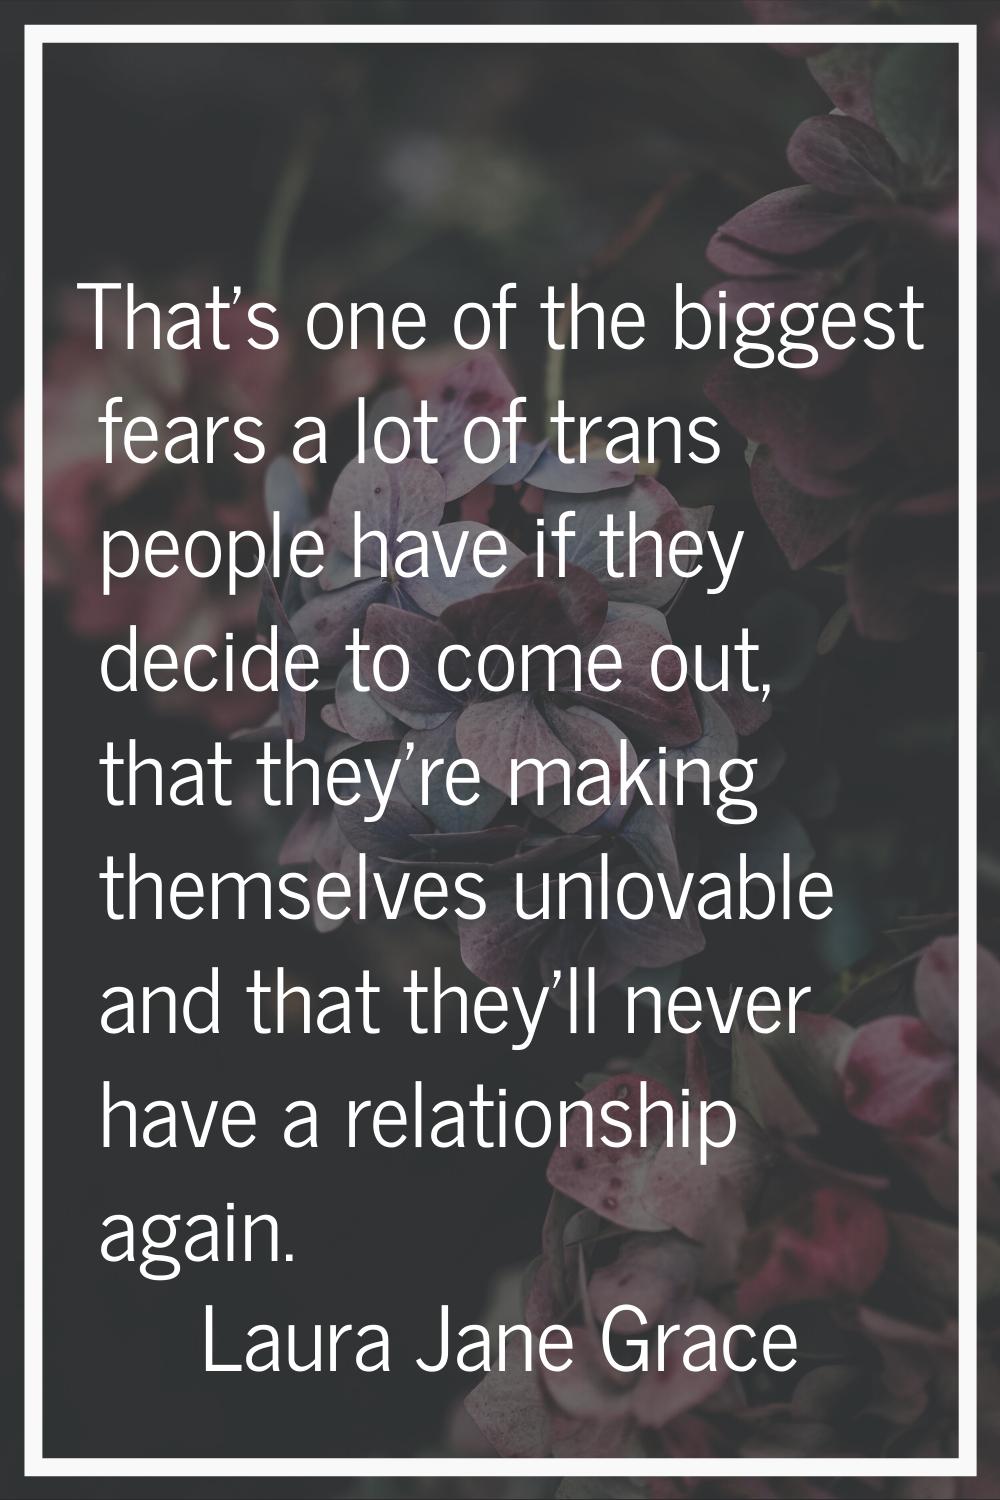 That's one of the biggest fears a lot of trans people have if they decide to come out, that they're